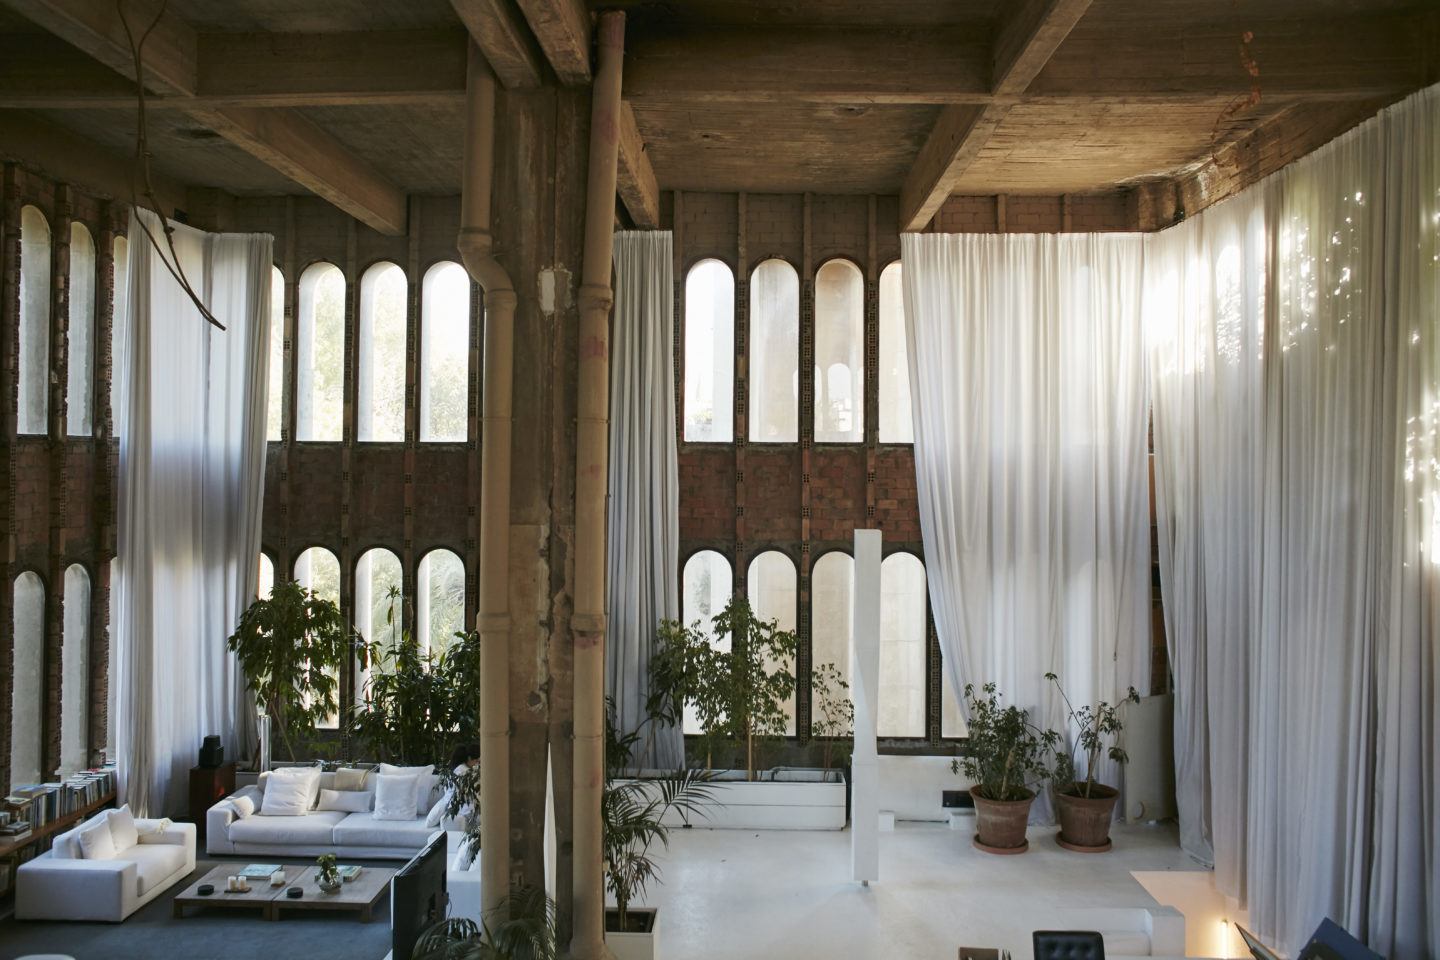 Design Inspiration: The Cement Factory by Ricardo Bofill, Catalonia, Spain